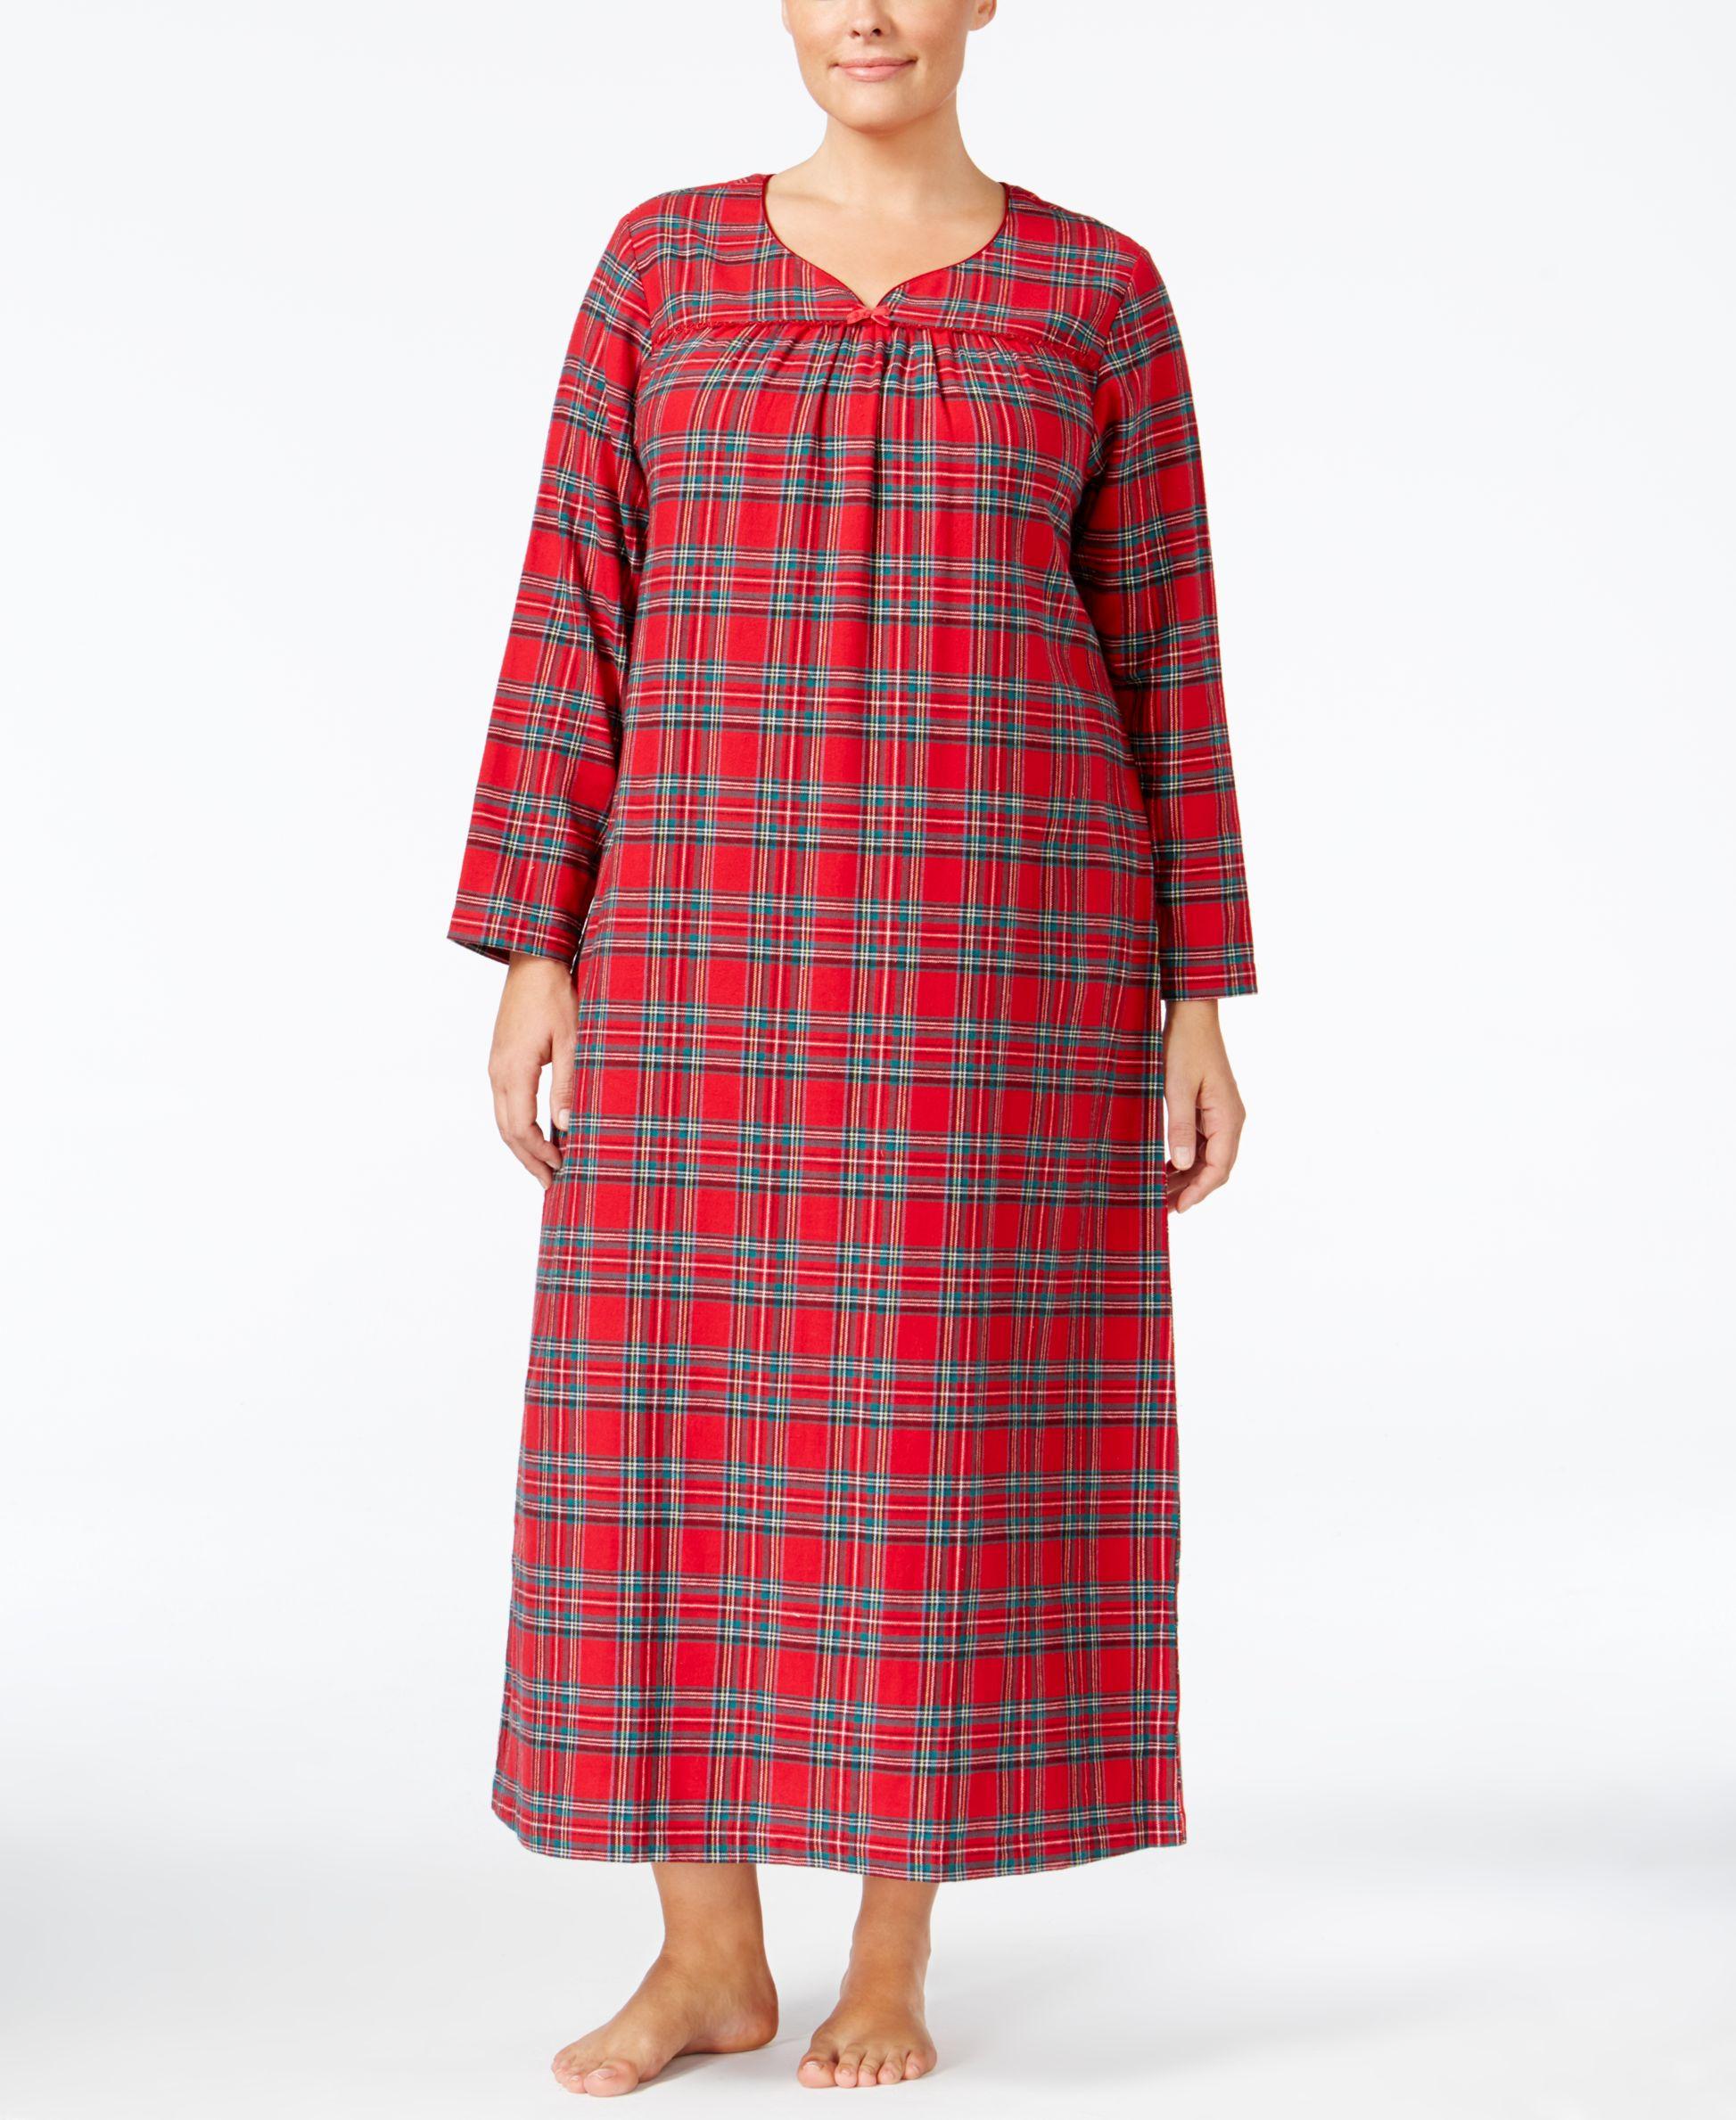 Lyst - Charter Club Plus Size Printed Flannel Nightgown, Only At Macy's ...